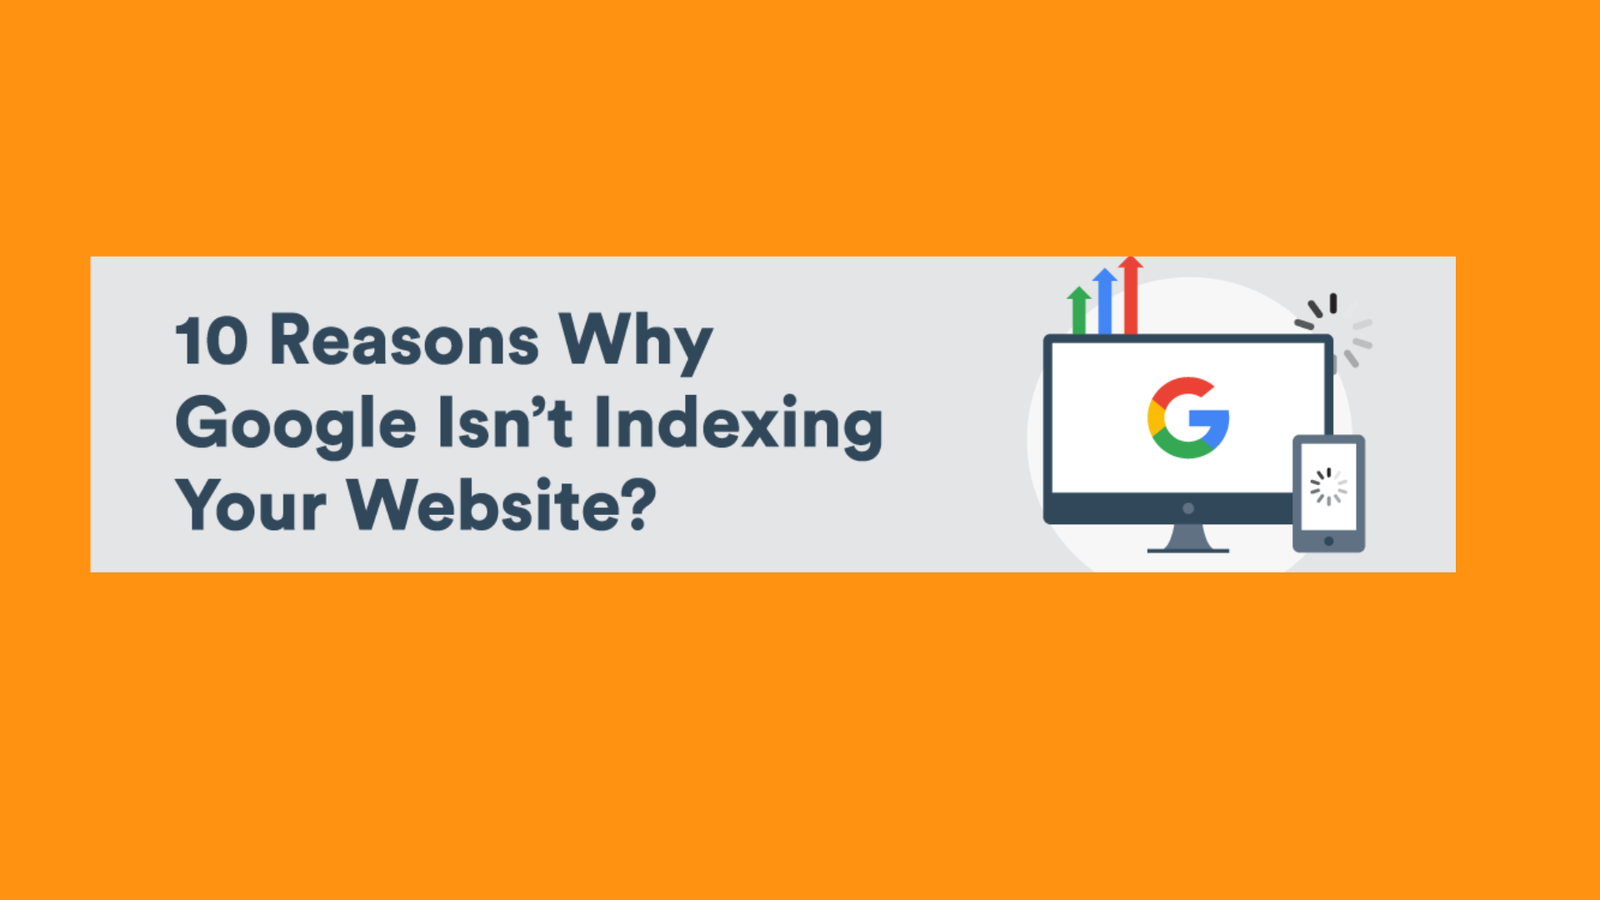 10 Reasons Why Google Isn’t Indexing Your Website?